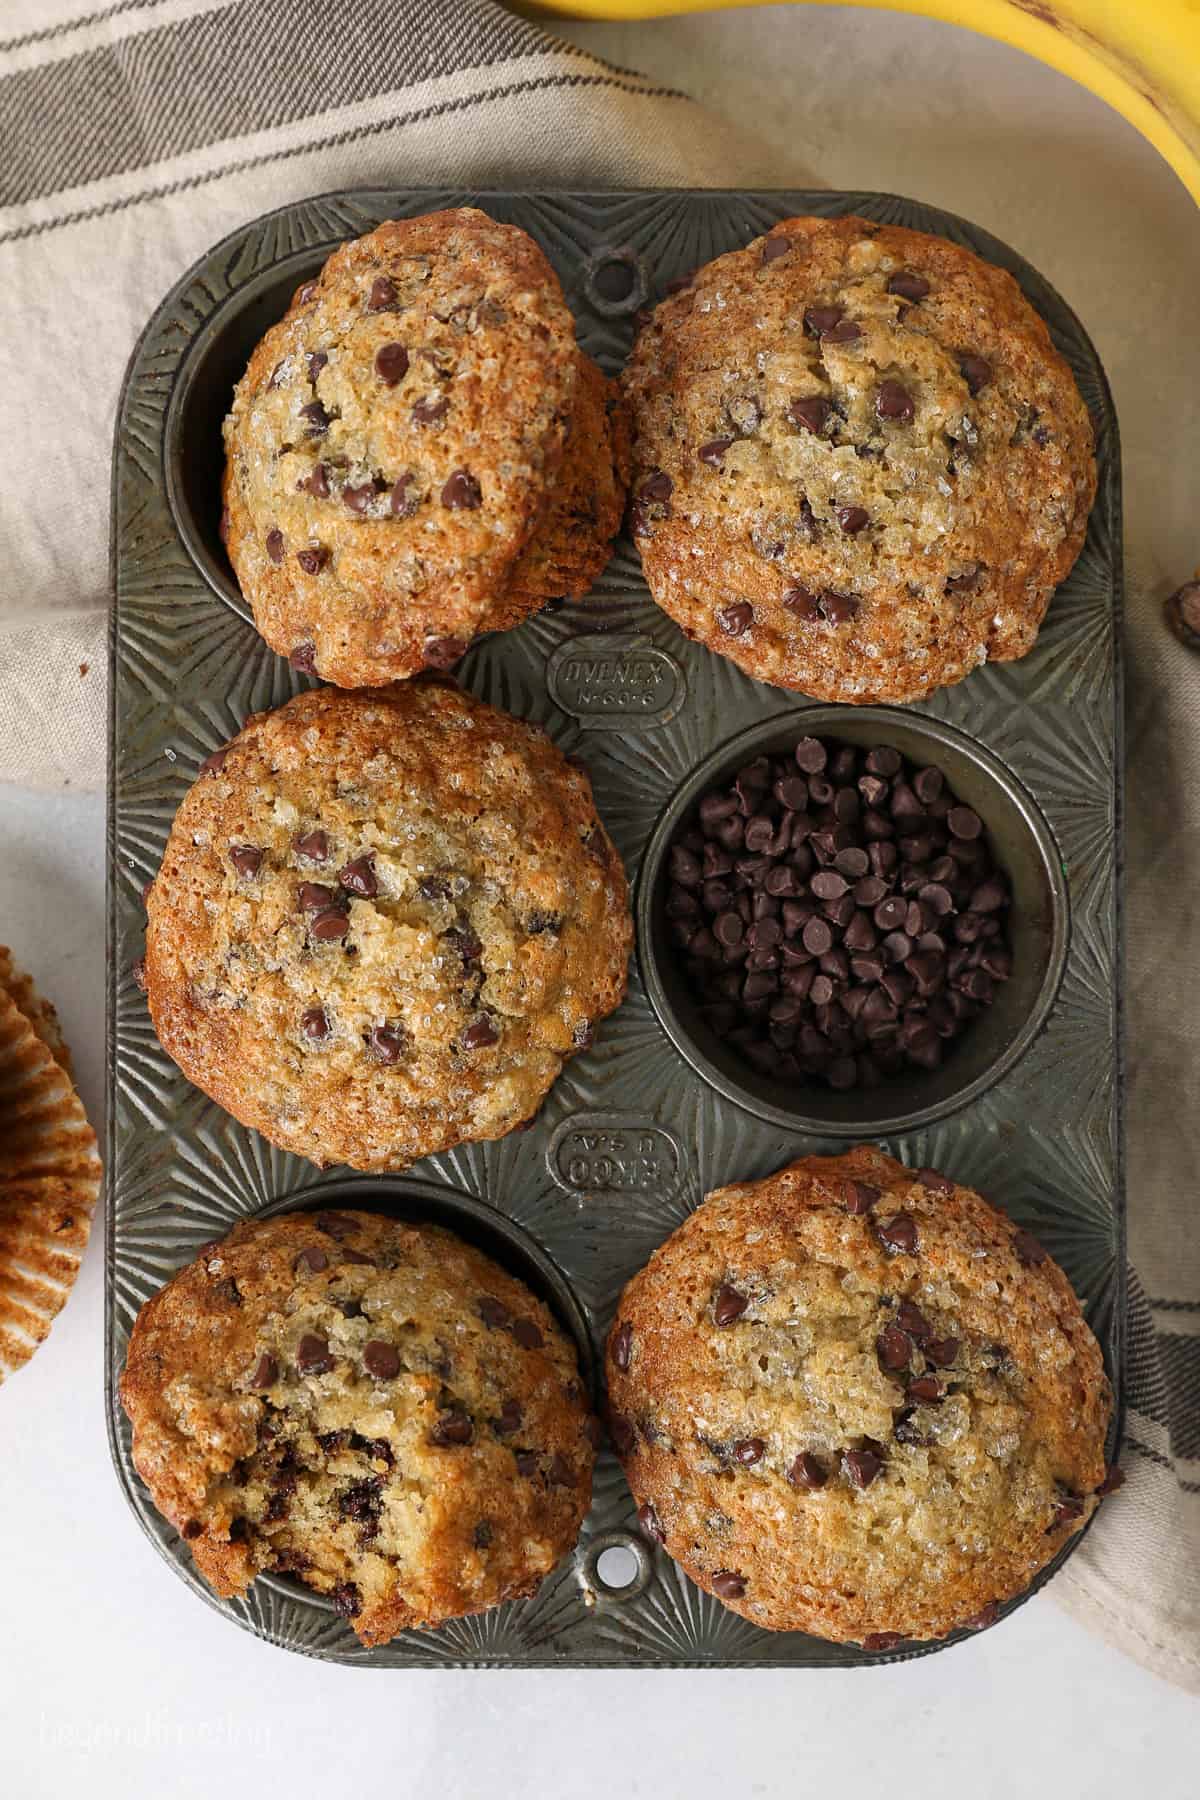 Overhead view of banana chocolate chip muffins in a muffin tin, with one well filled with chocolate chips.